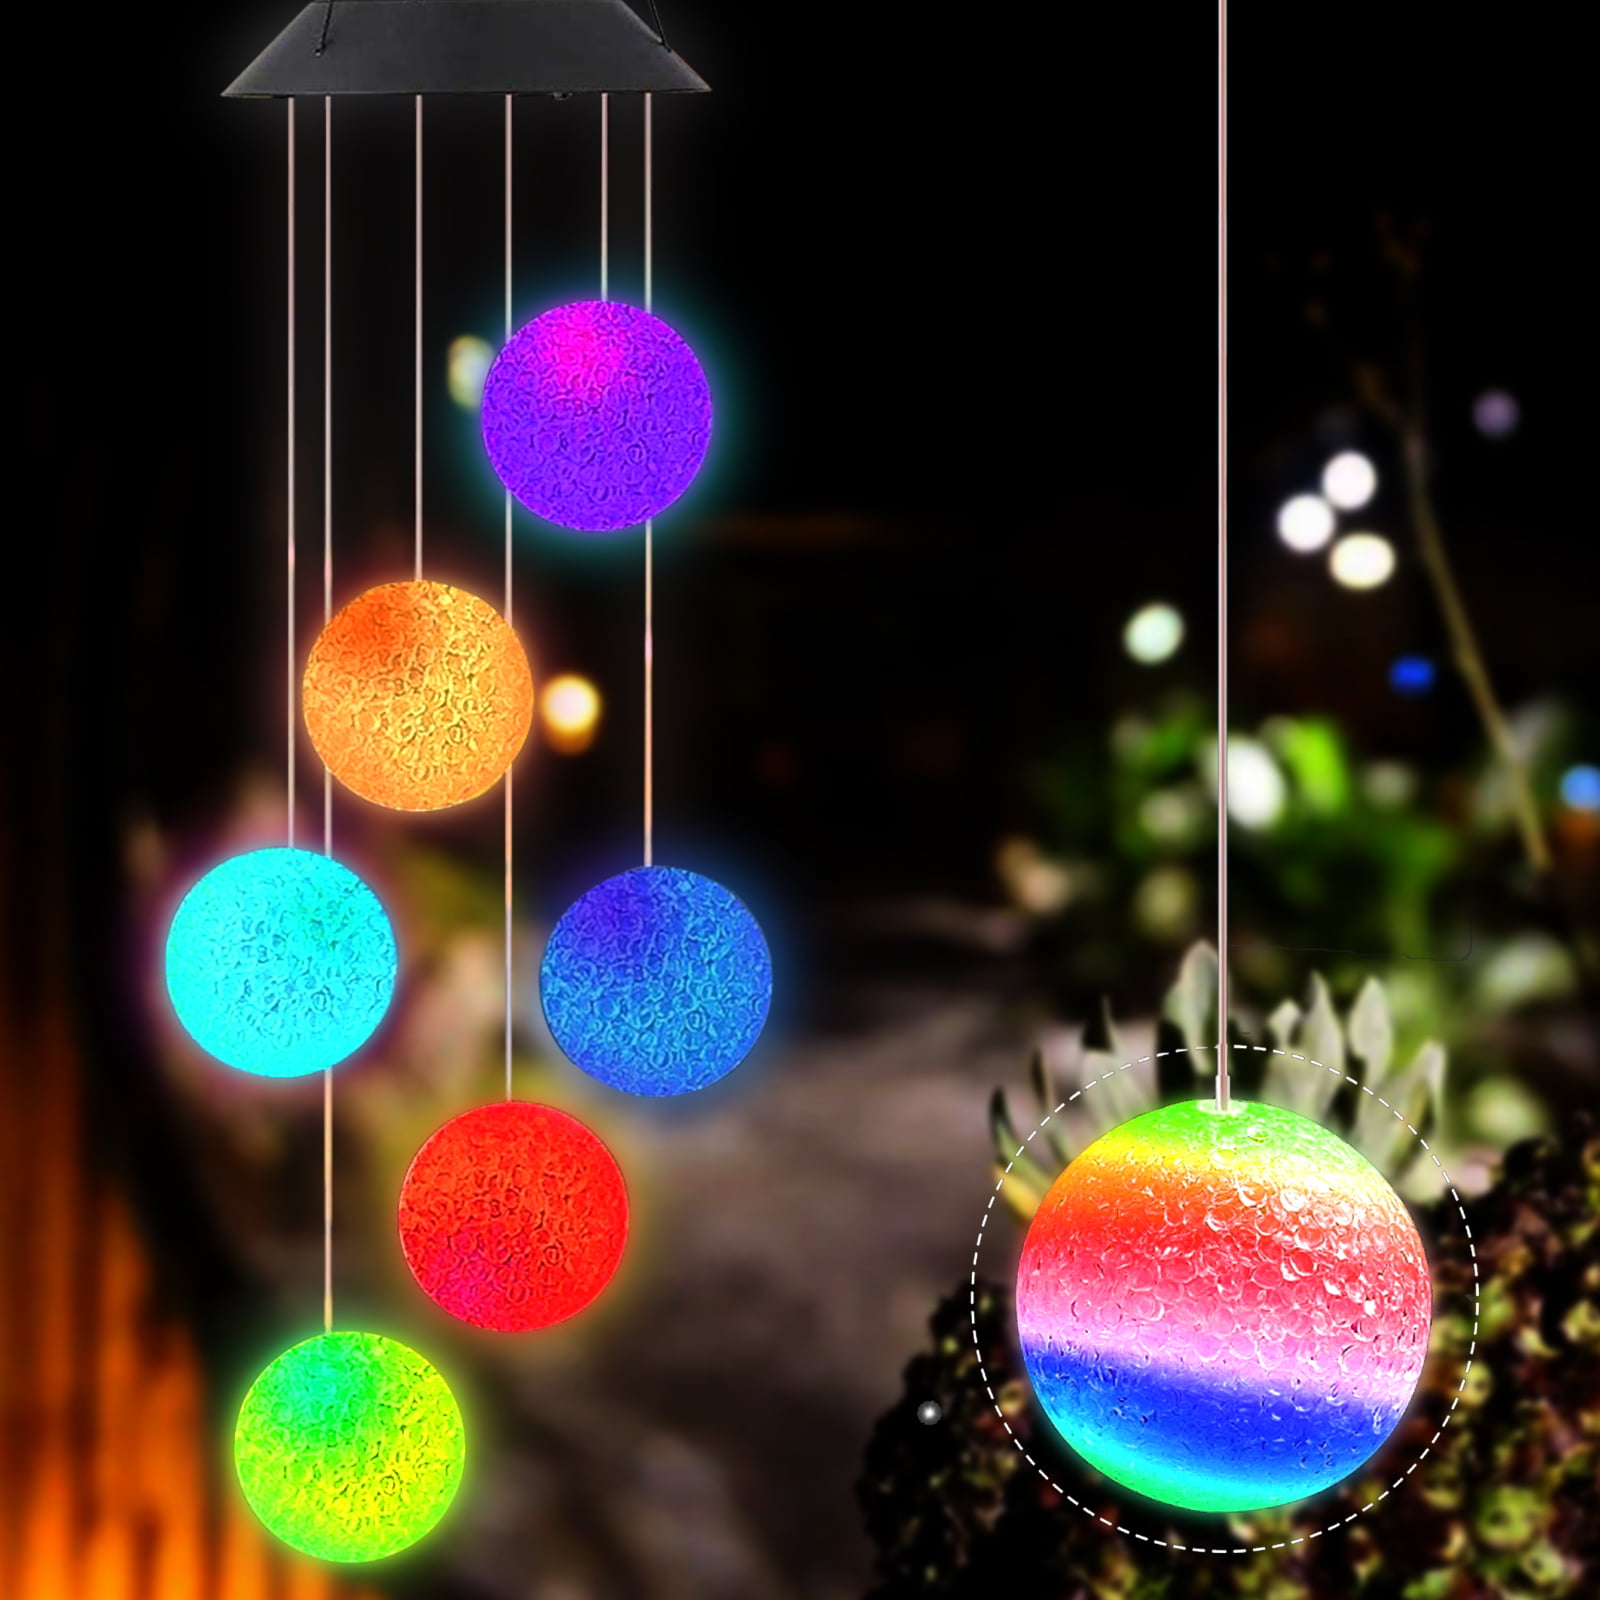 Waterproof Decorative Light with Color Changing LED Lights Gifts for Mom Wife Crystal Ball Wind Chimes with Bells niboameu Solar Wind Chimes Grandma Romantic Décor for Garden Yard Home